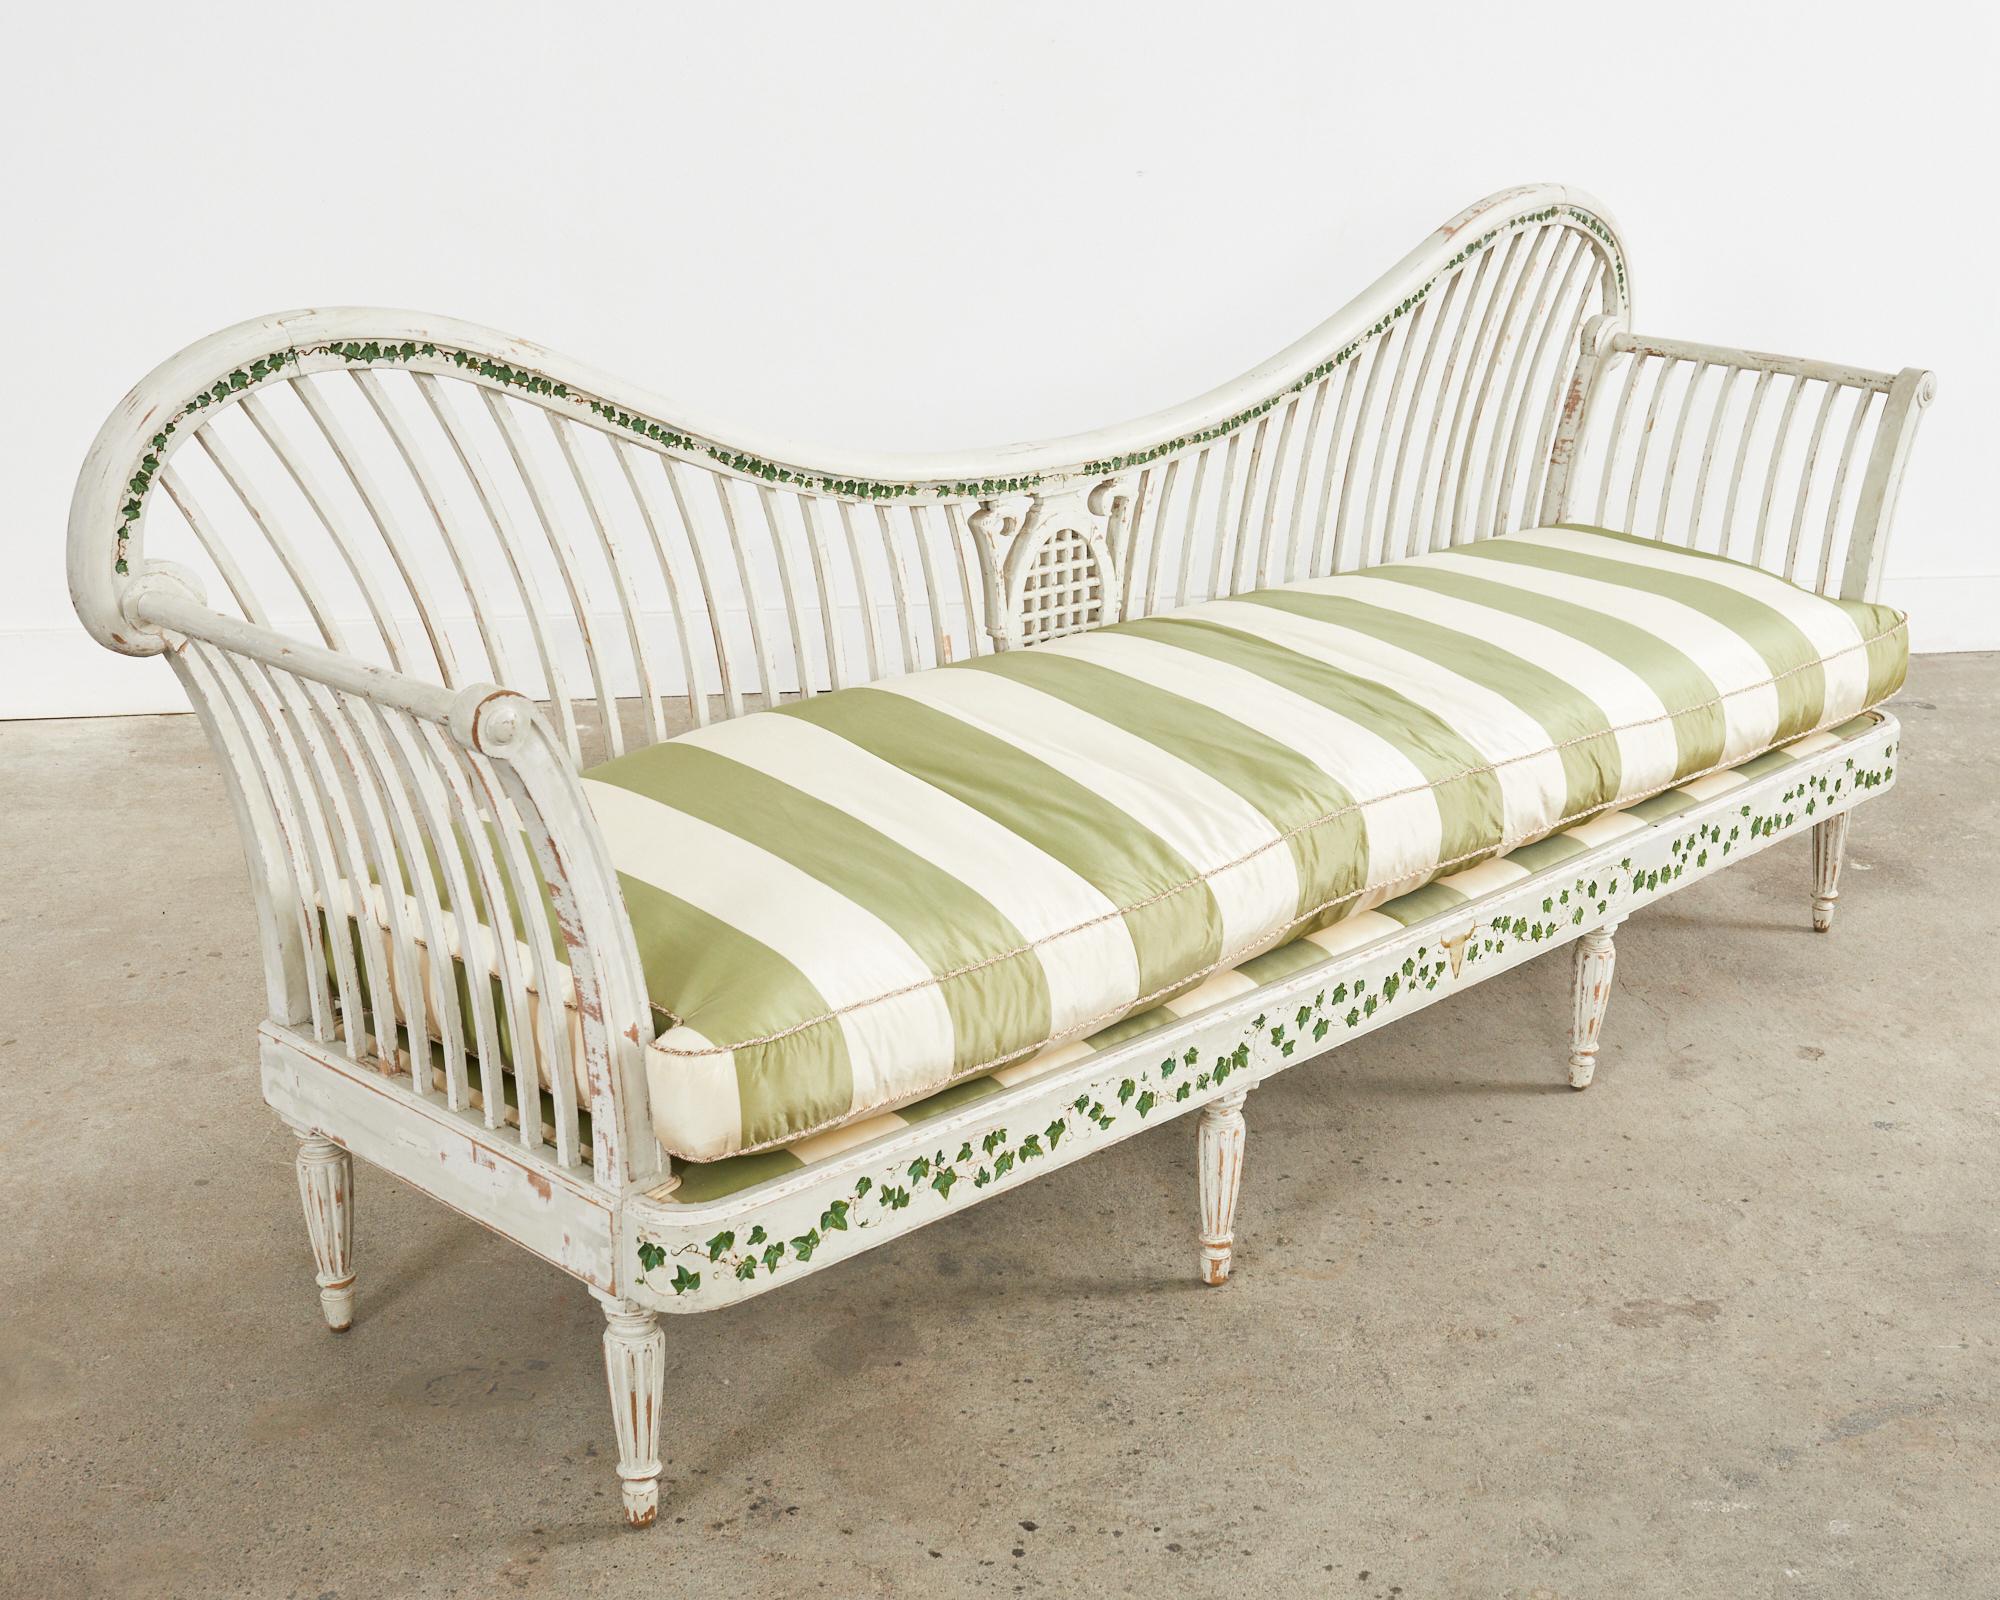 20th Century Swedish Neoclassical Style Painted Pine Daybed Bench Settee